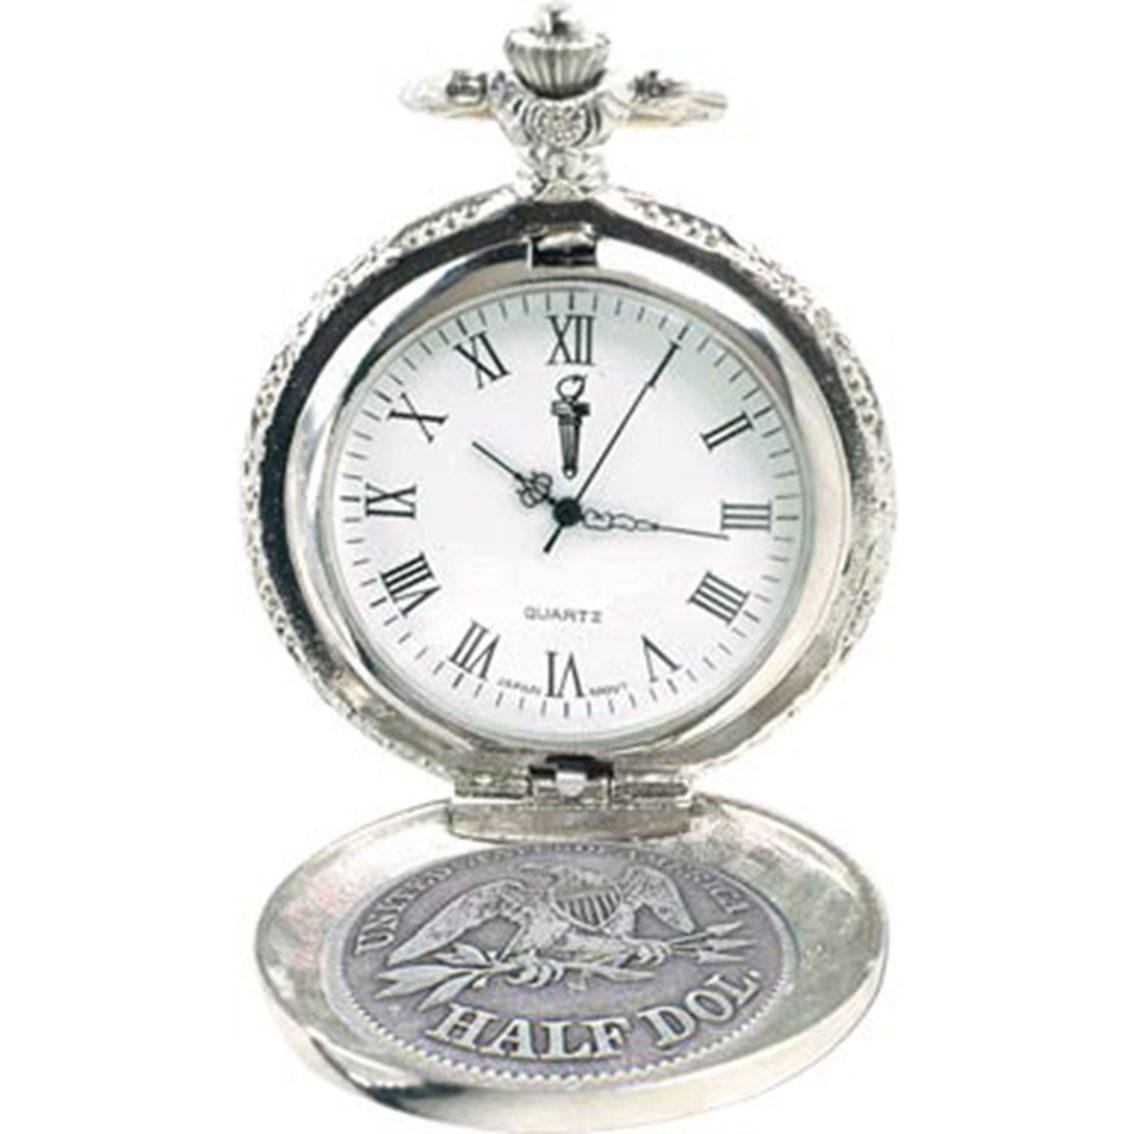 Men's Seated Liberty Silver Half Dollar Pocket Watch 11452 - Image 2 of 2